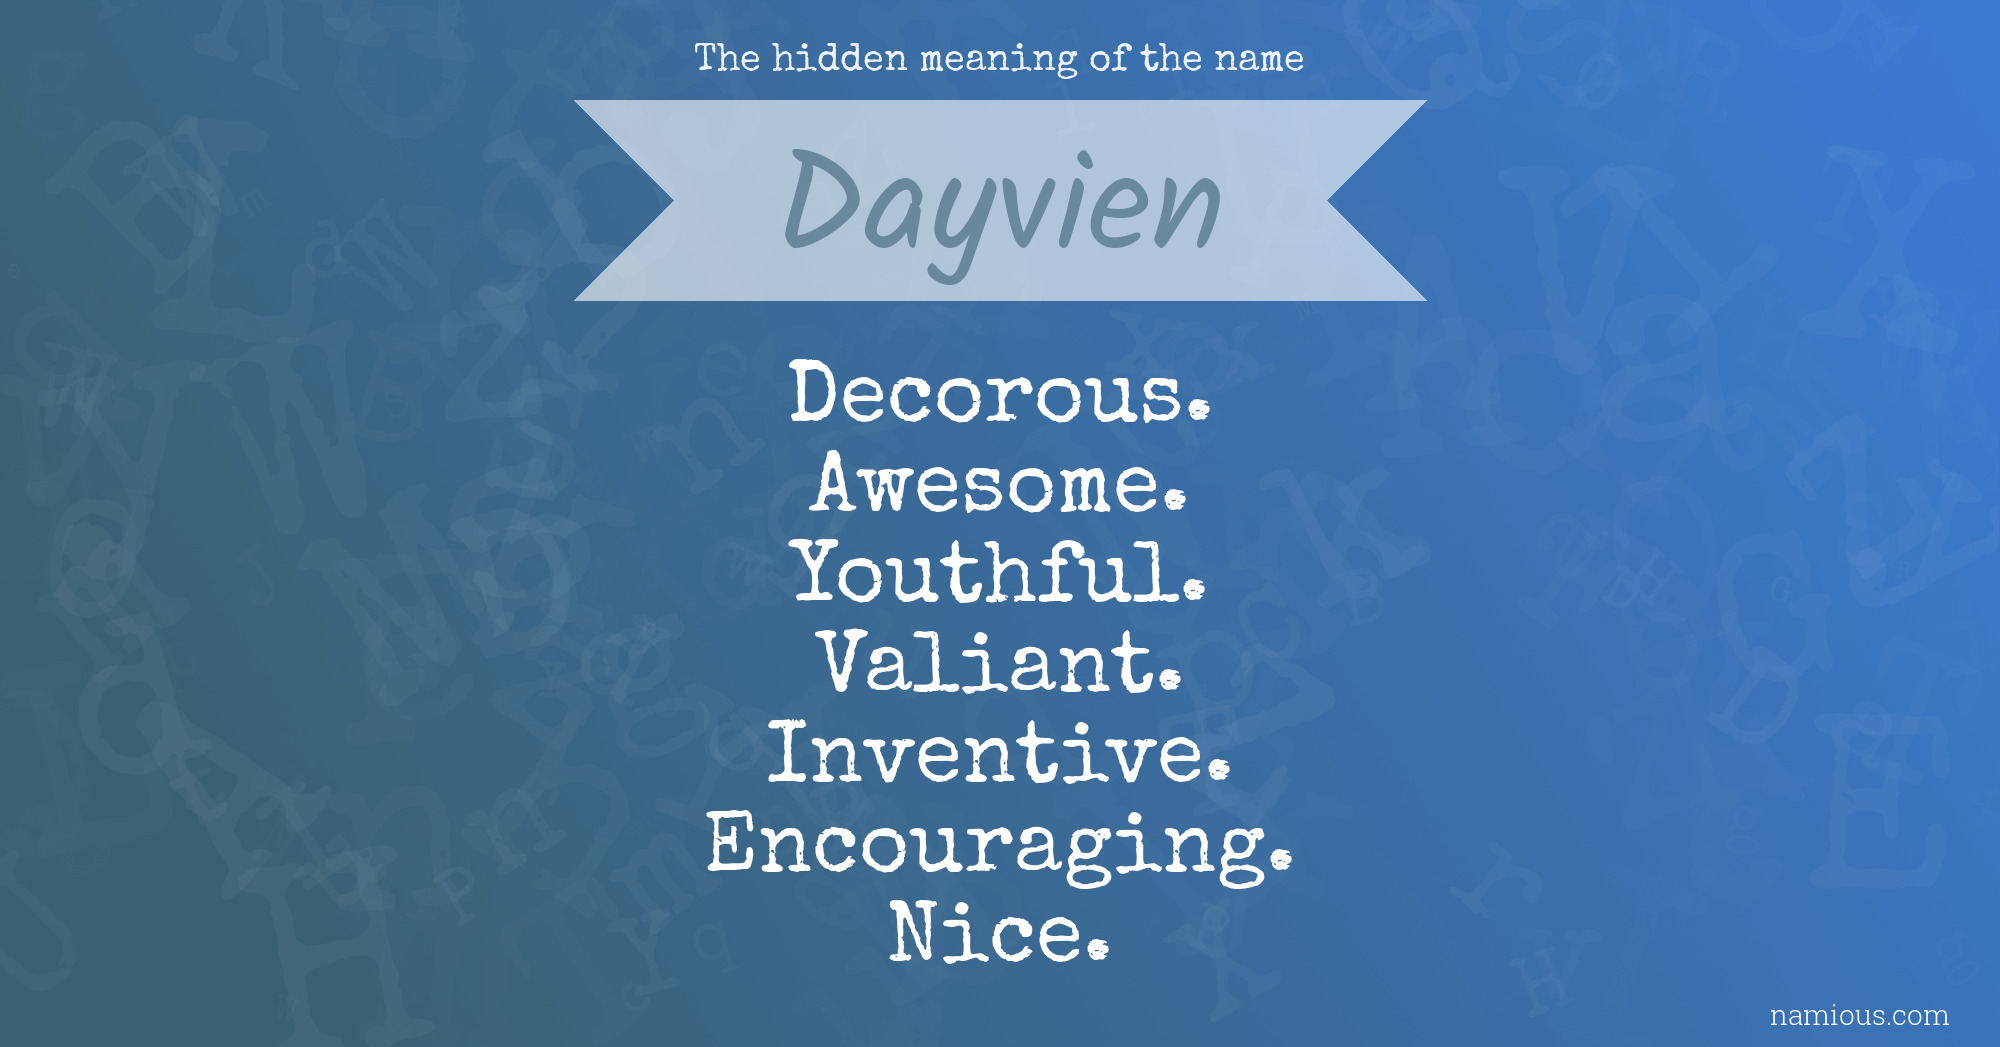 The hidden meaning of the name Dayvien